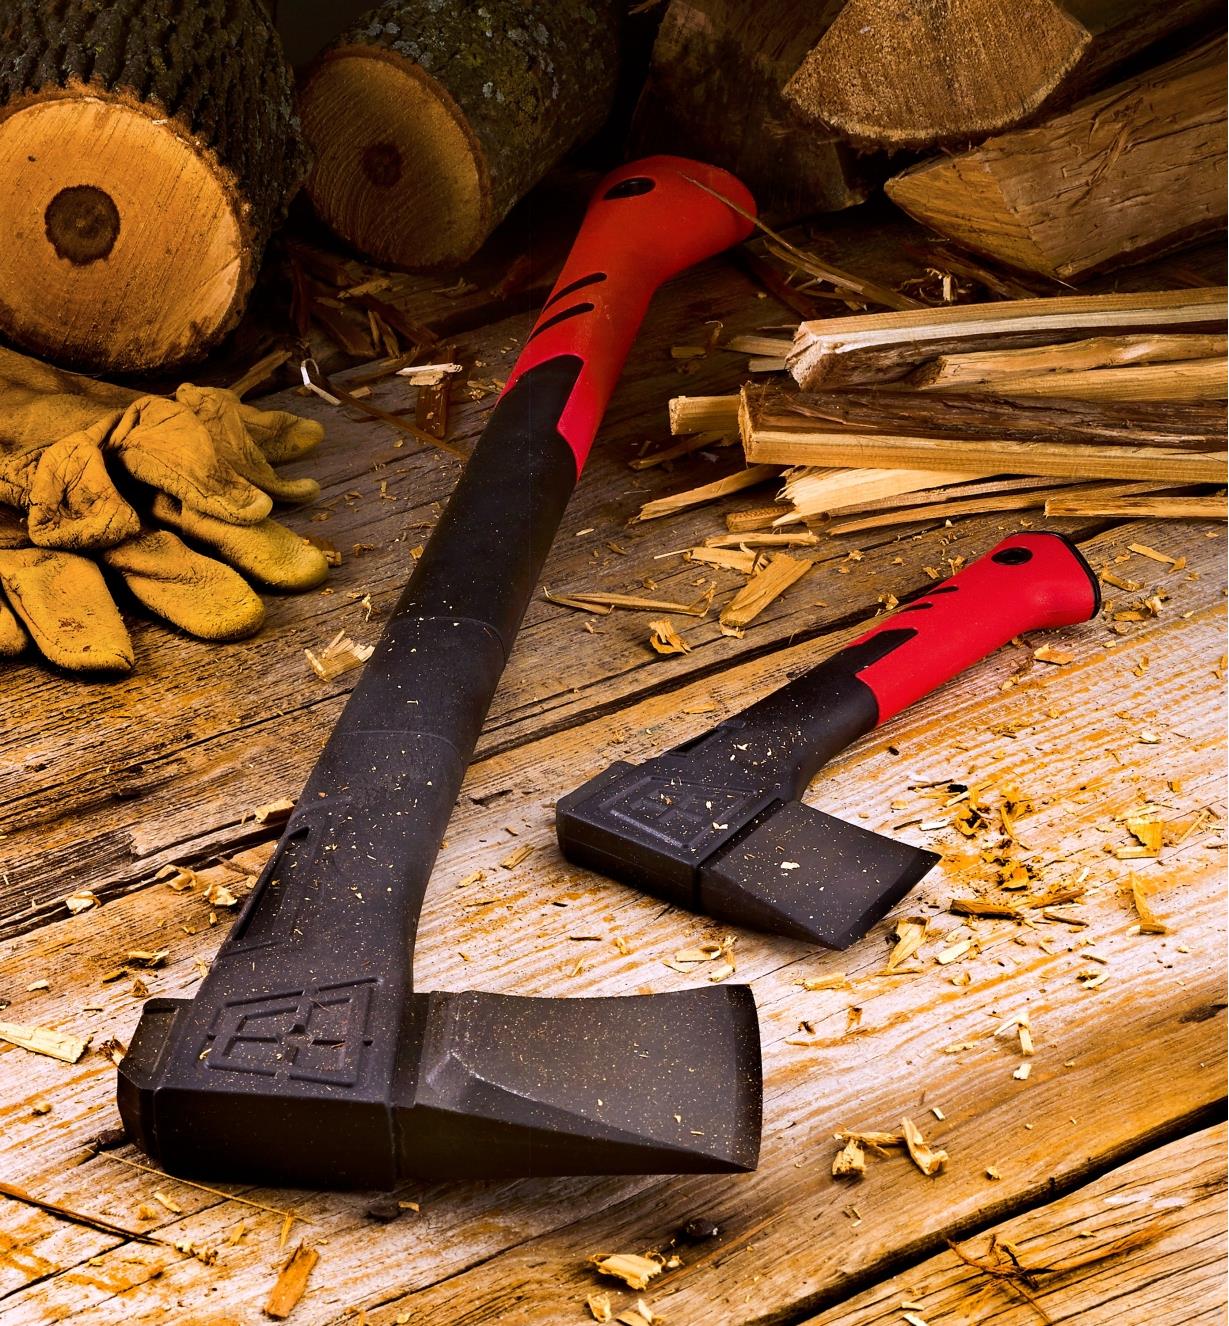 The splitting axe and the hatchet lying near some firewood and kindling